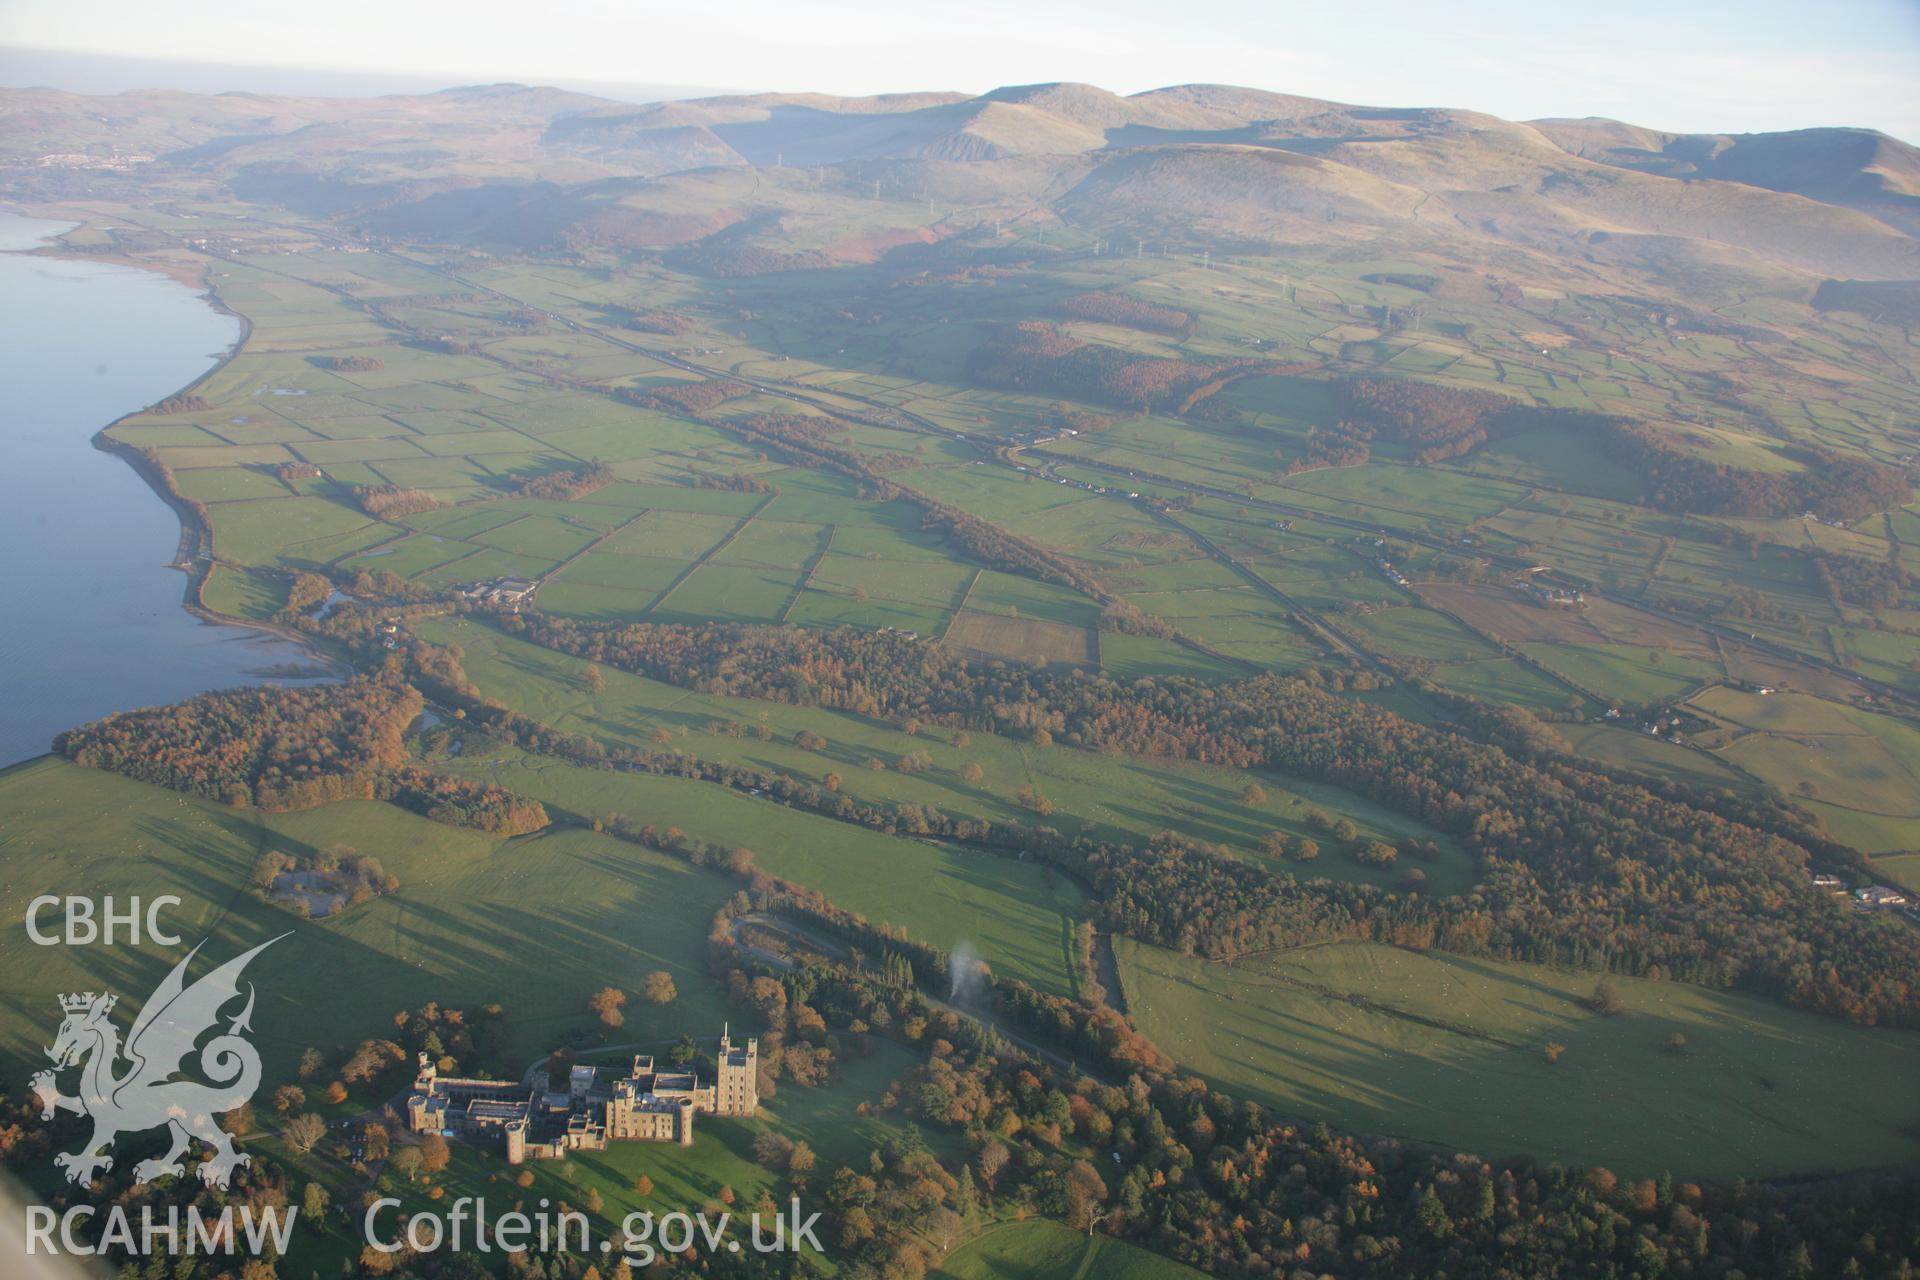 RCAHMW colour oblique aerial photograph of Penrhyn Castle Garden, Bangor, with coastal hills in panoramic view looking east from the park. Taken on 21 November 2005 by Toby Driver